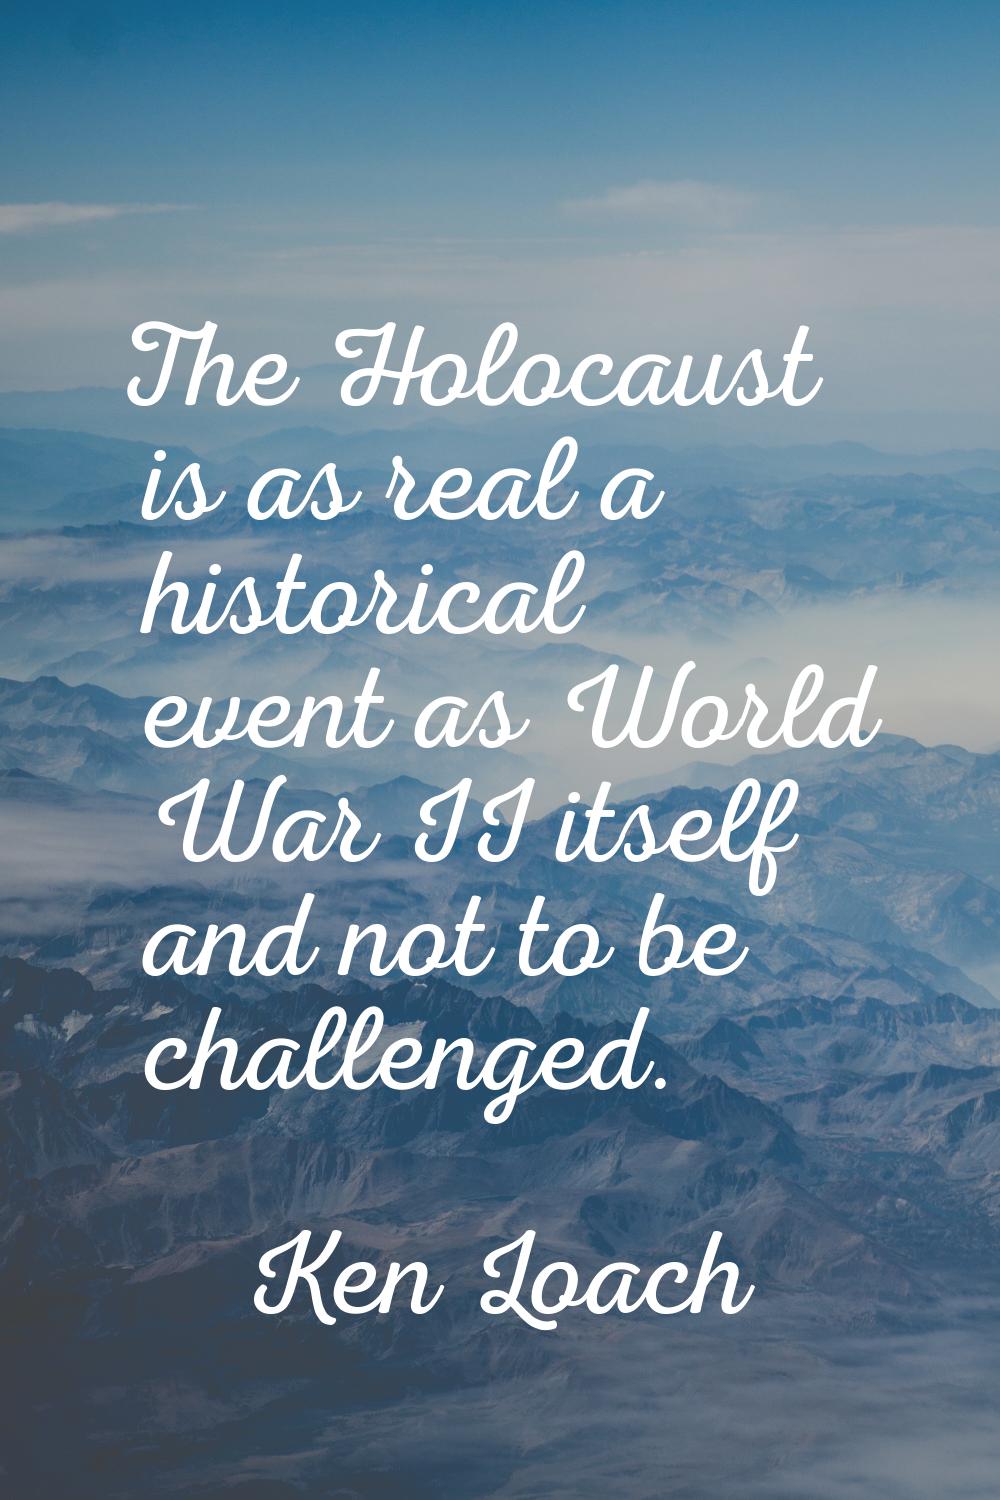 The Holocaust is as real a historical event as World War II itself and not to be challenged.